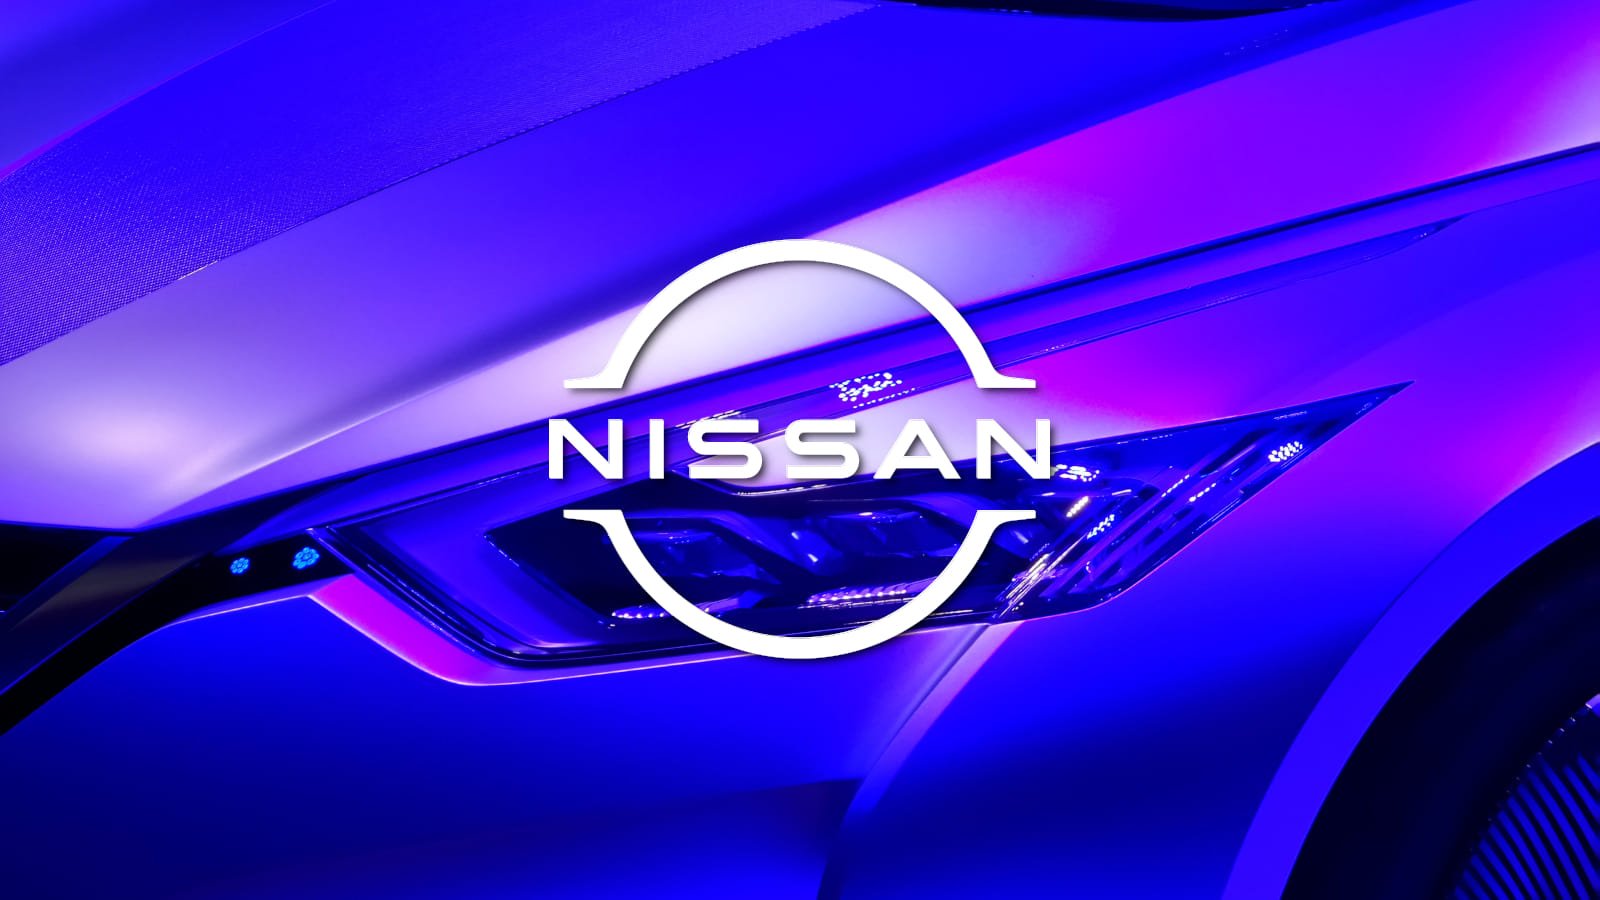 Nissan is investigating cyberattack and abeyant abstracts breach